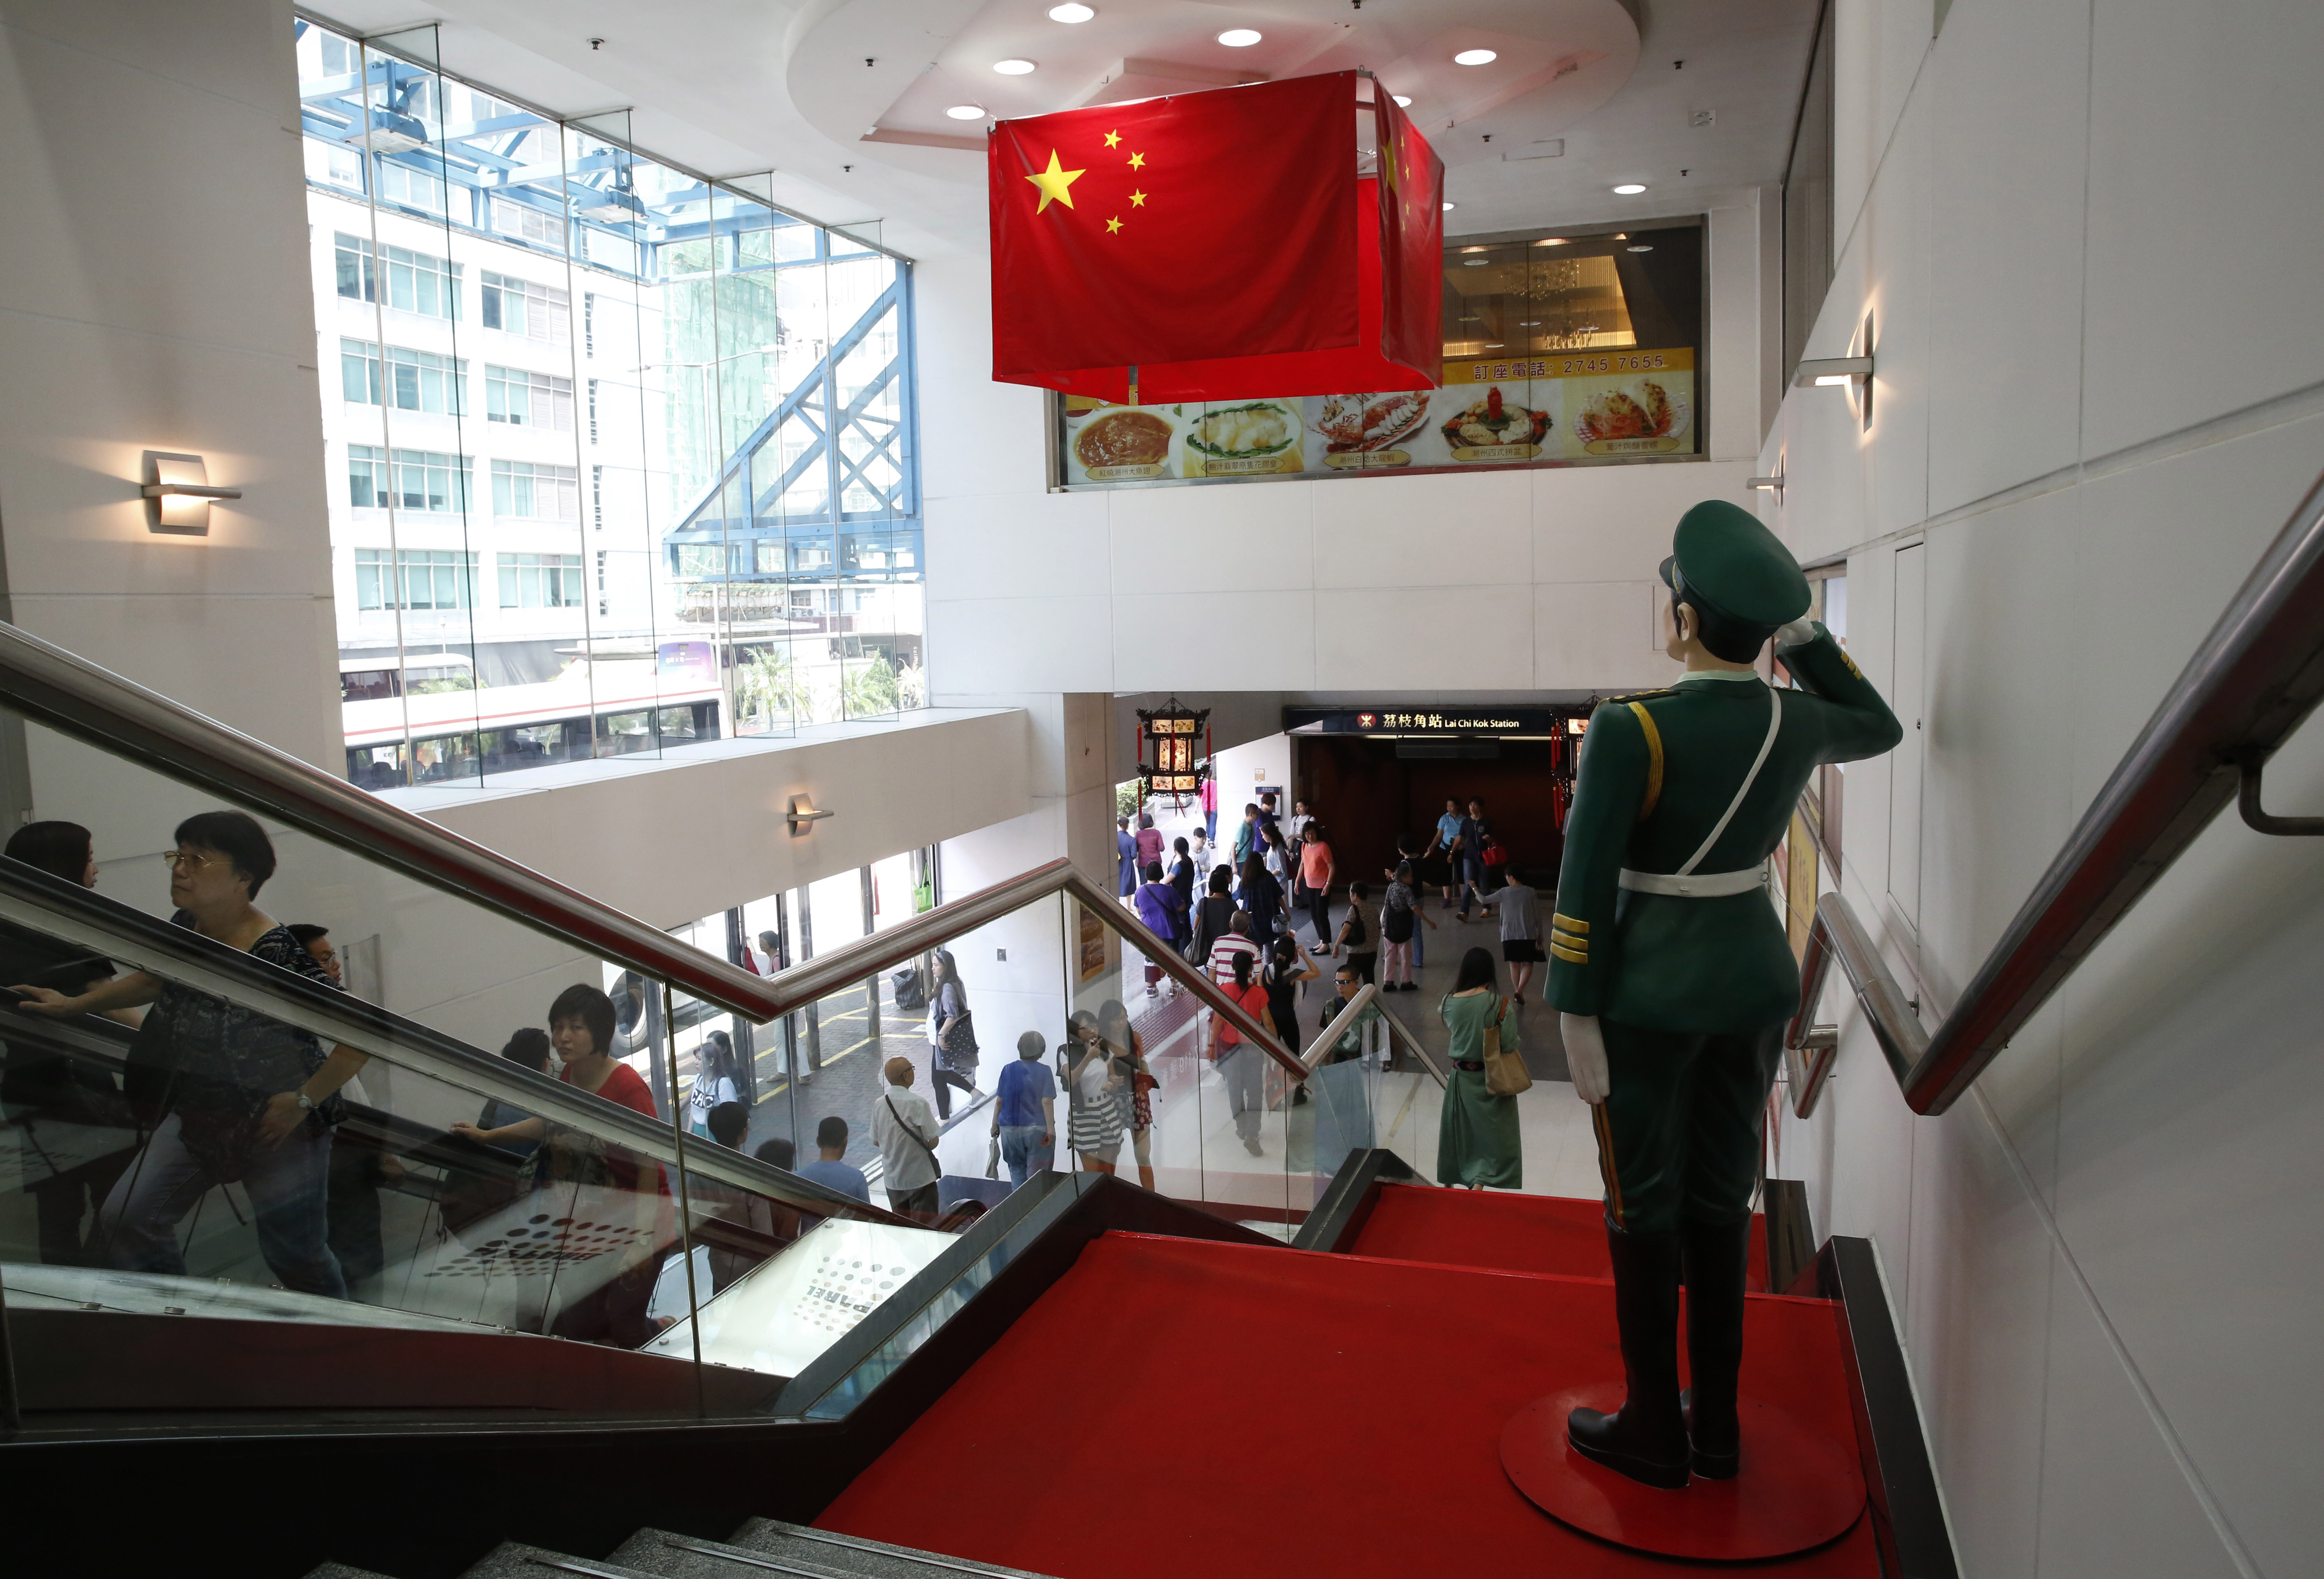 A statue of a People's Liberation Army officer is displayed in a Hong Kong shopping centre ahead of the National Day on October 1. Photo: AP